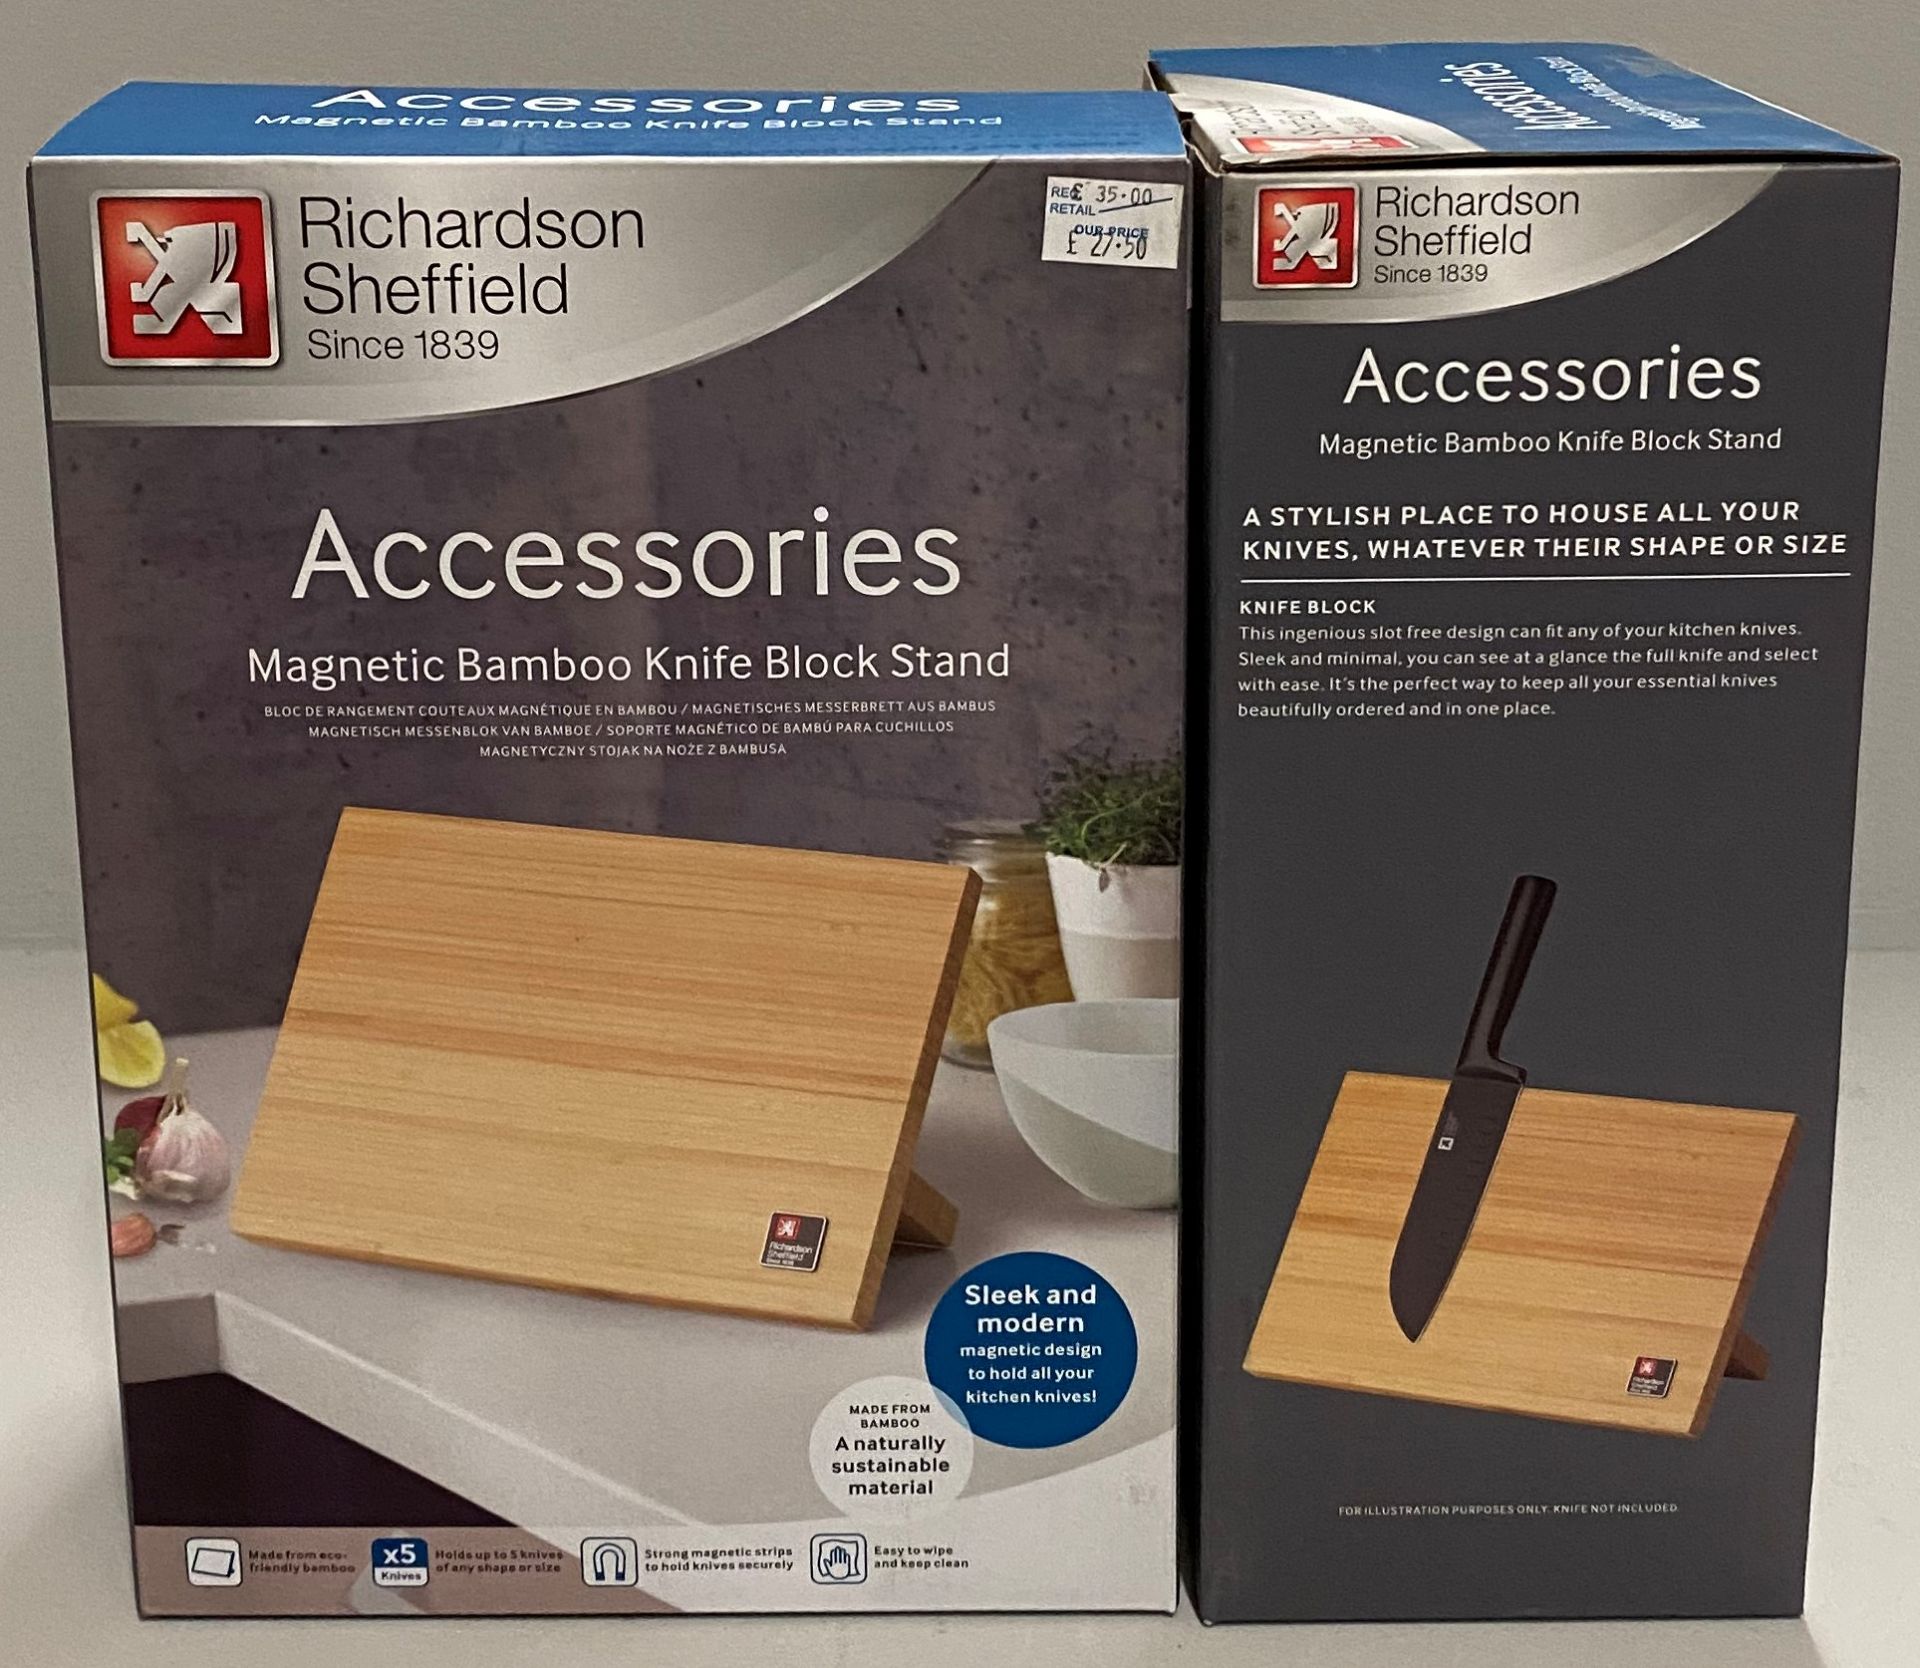 2 x Richardson Sheffield Accessories Magnetic Bamboo Knife block stand RRP £35.